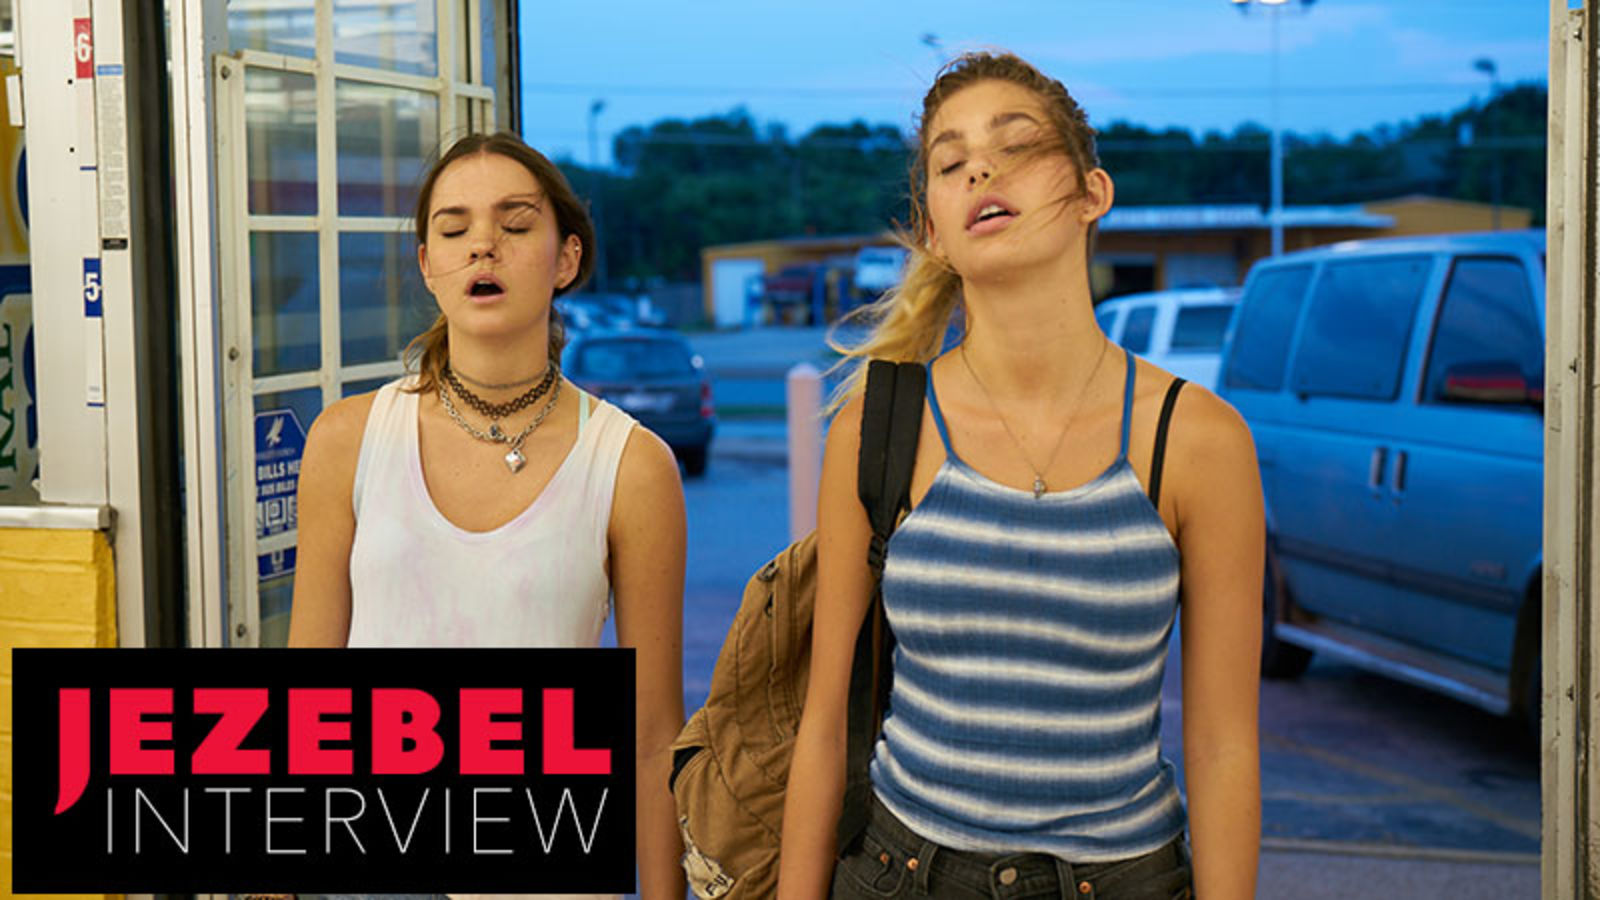 Director Augustine Frizzell on Representation in Her Druggie